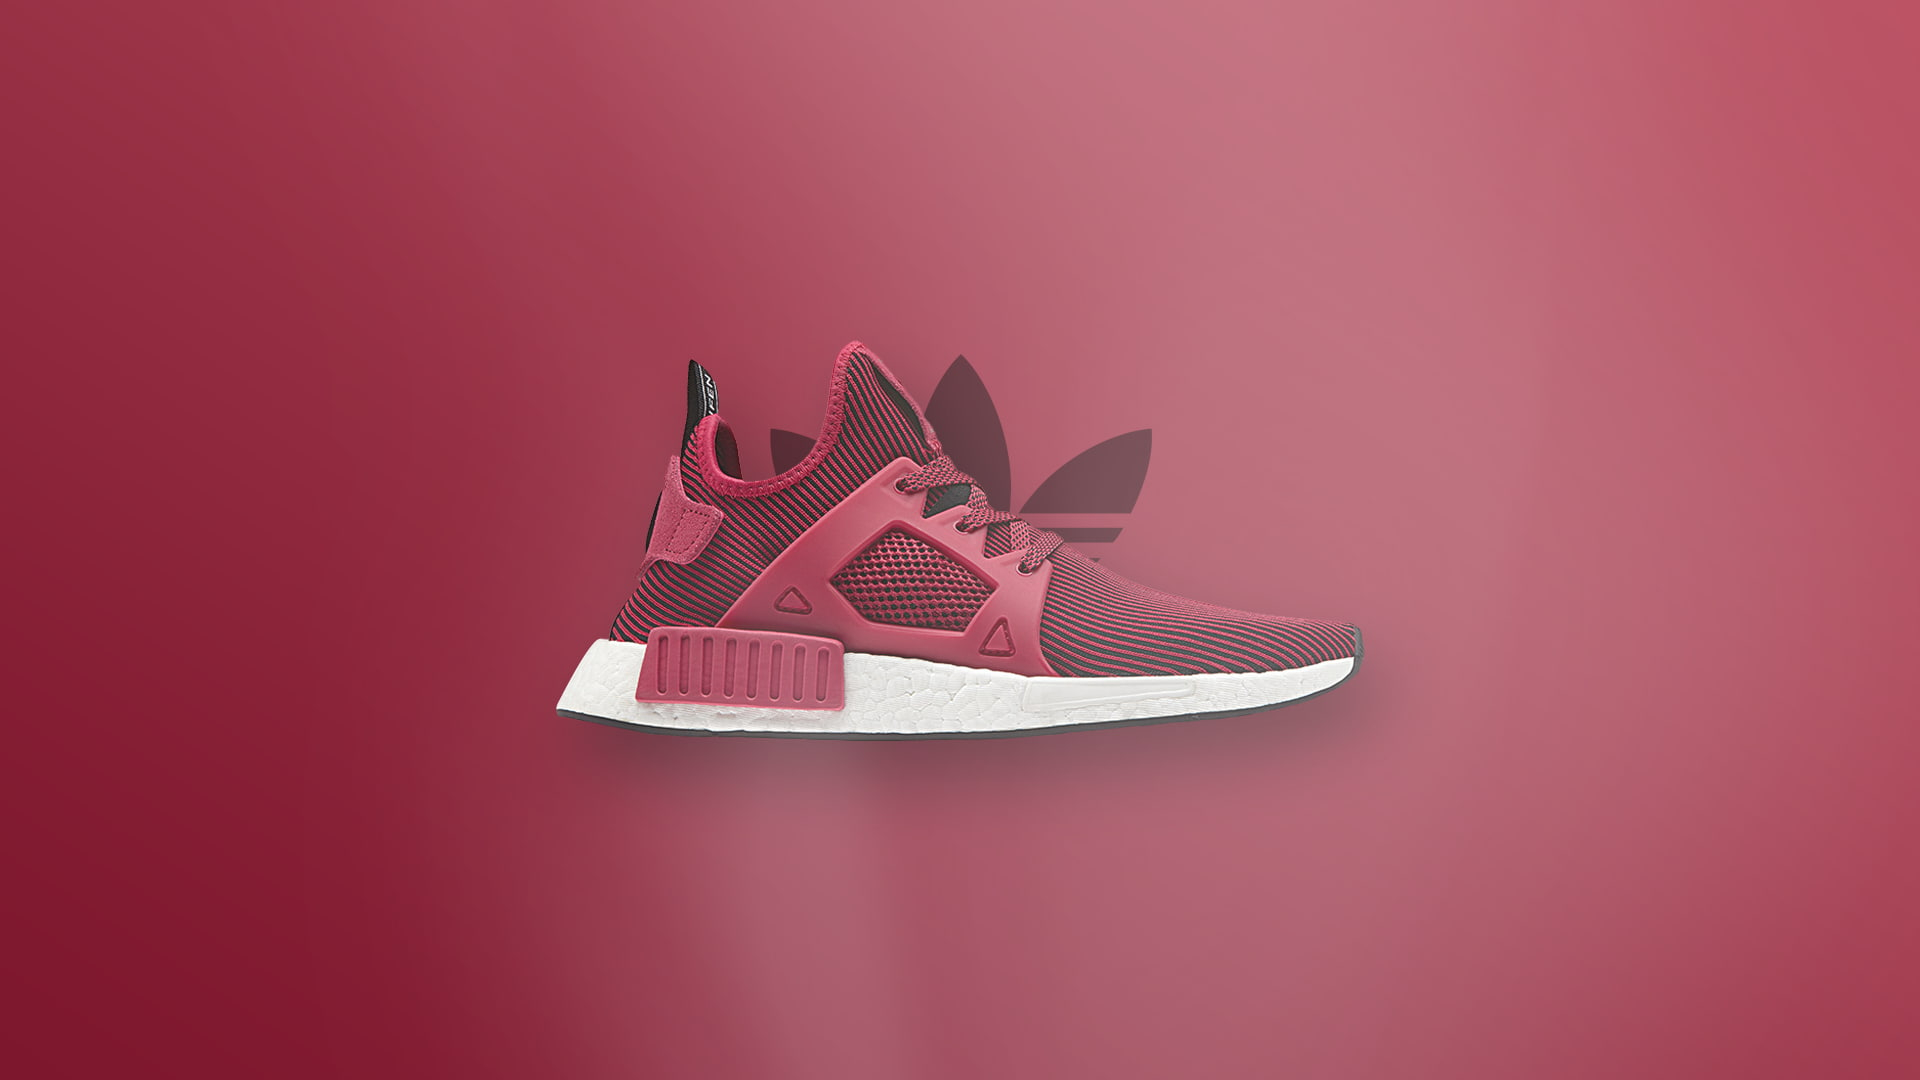 Adidas wallpaper, shoes, pink shoes, RX1R, red shoes